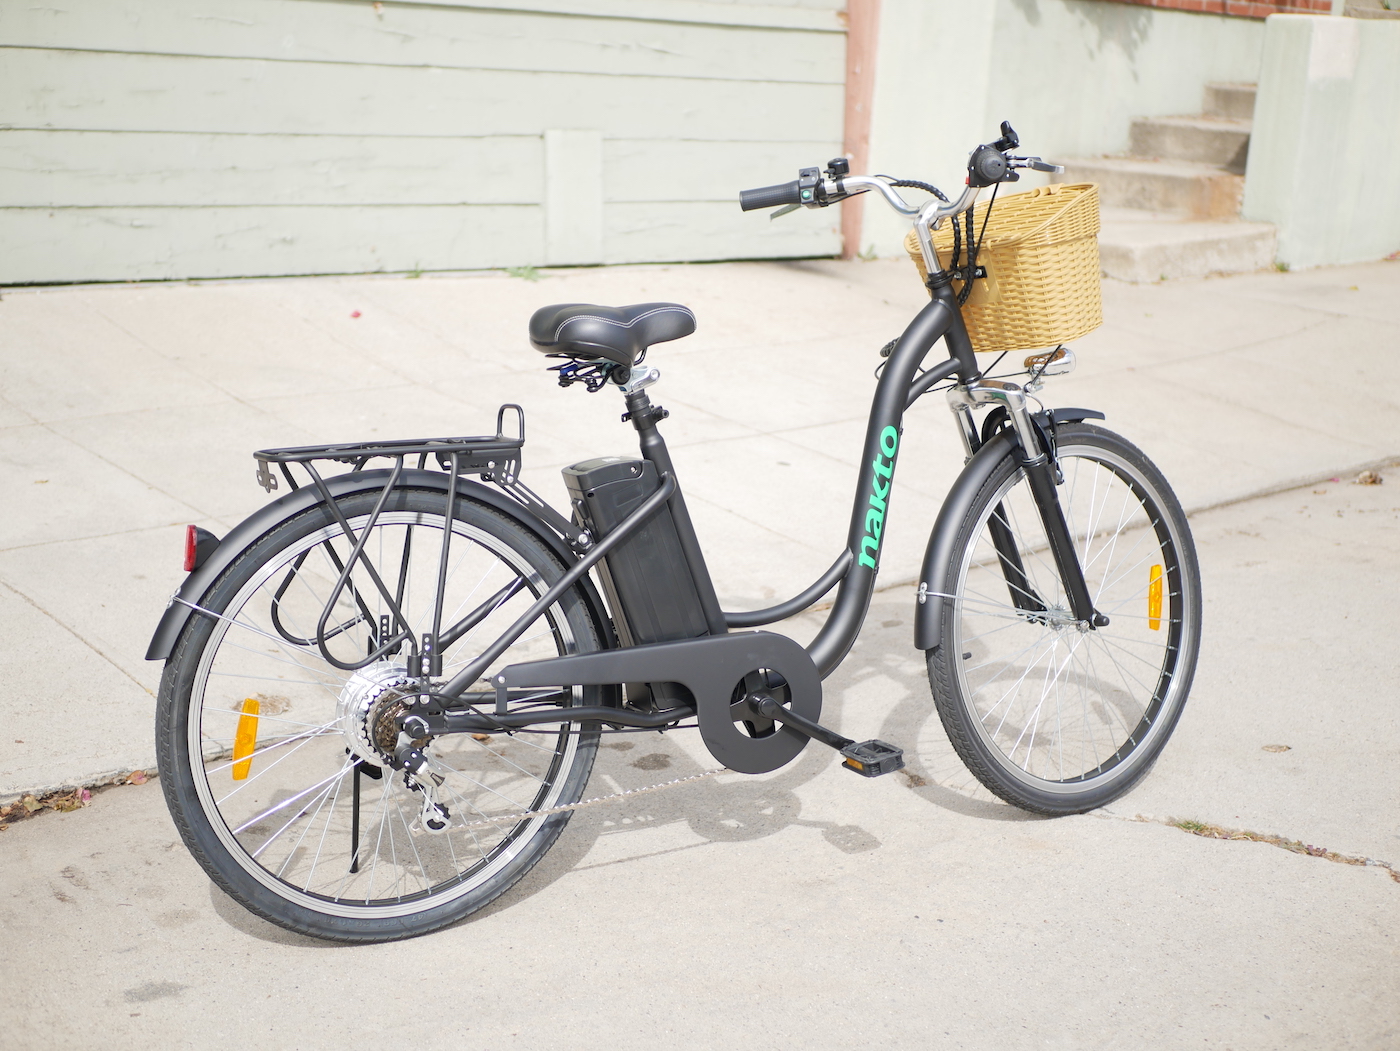 electric women's bicycles